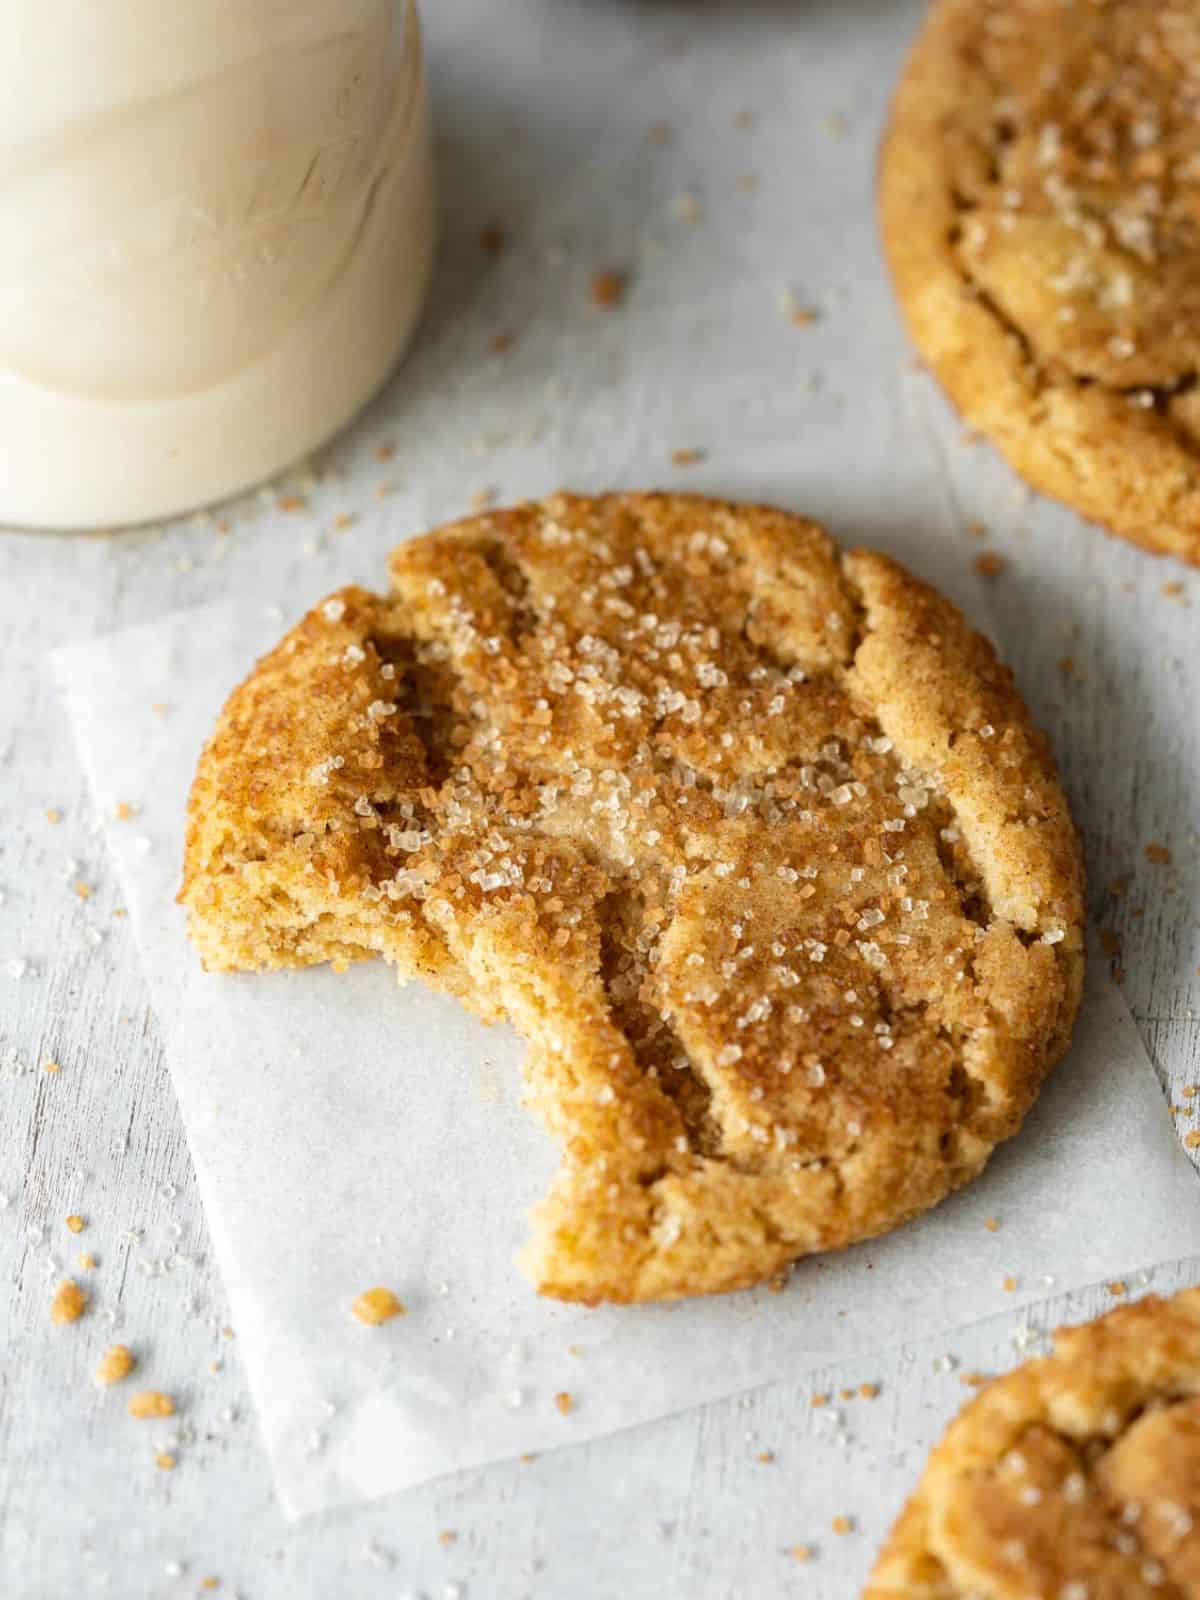 Snickerdoodle cookie with a bite taken out.
